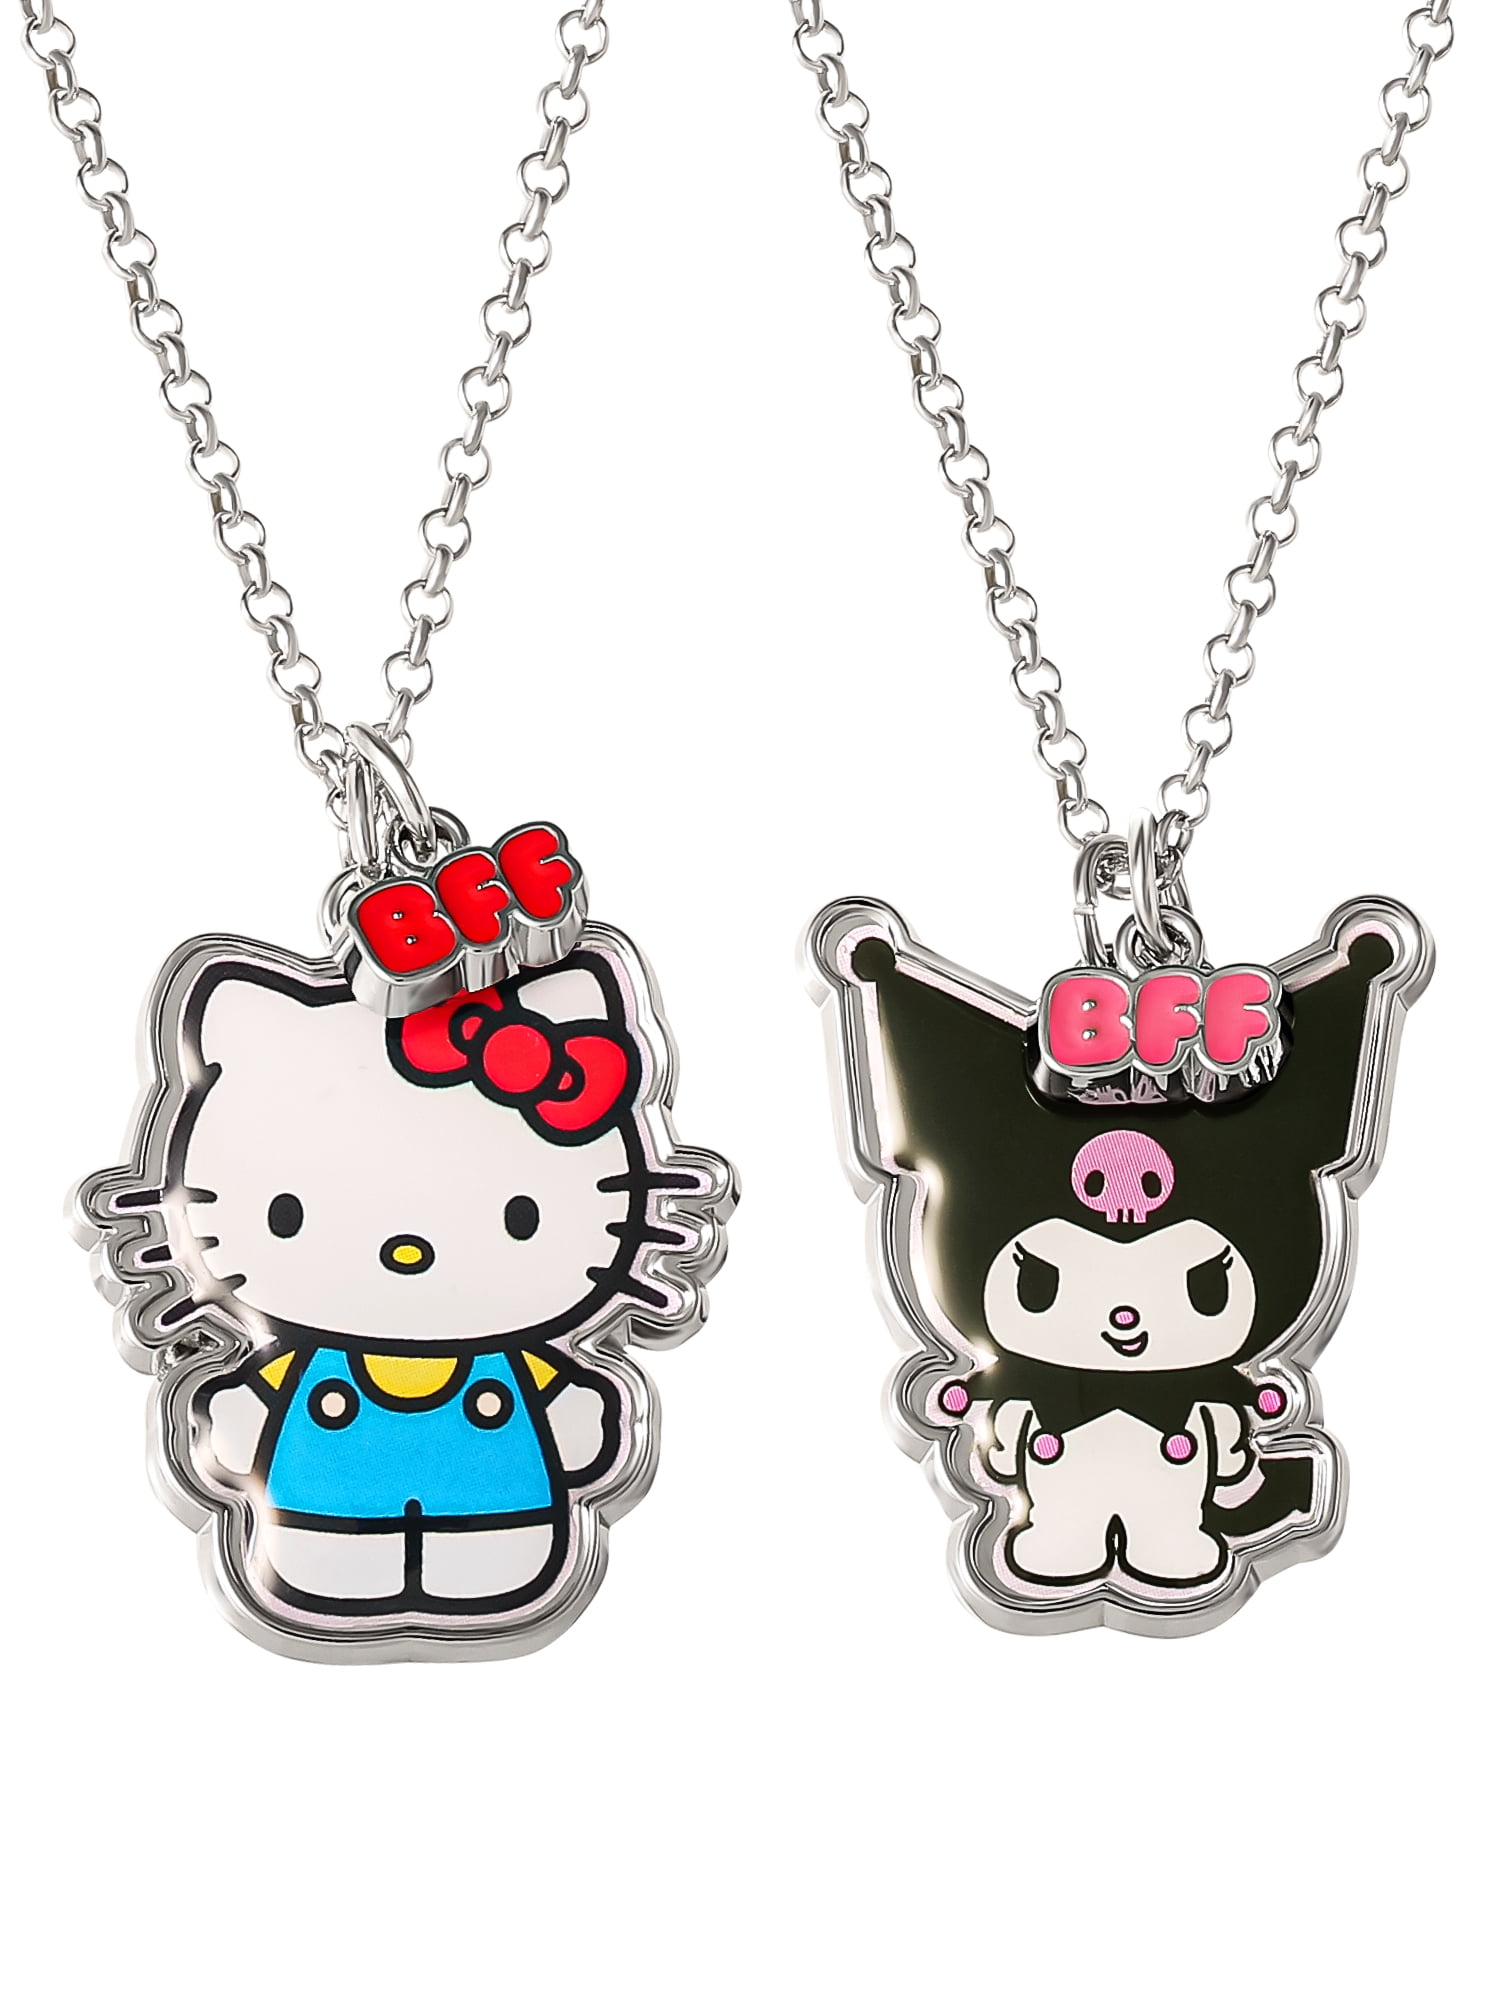 Miotlsy 2 Pcs Hello Kitty Necklace Set,Necklace Set Hello Kitty Alloy  Necklace Girls Party Favors Gift for Little Girls Toddlers Children Play  Pretend Dress Up, Premium alloy : Amazon.ae: Toys